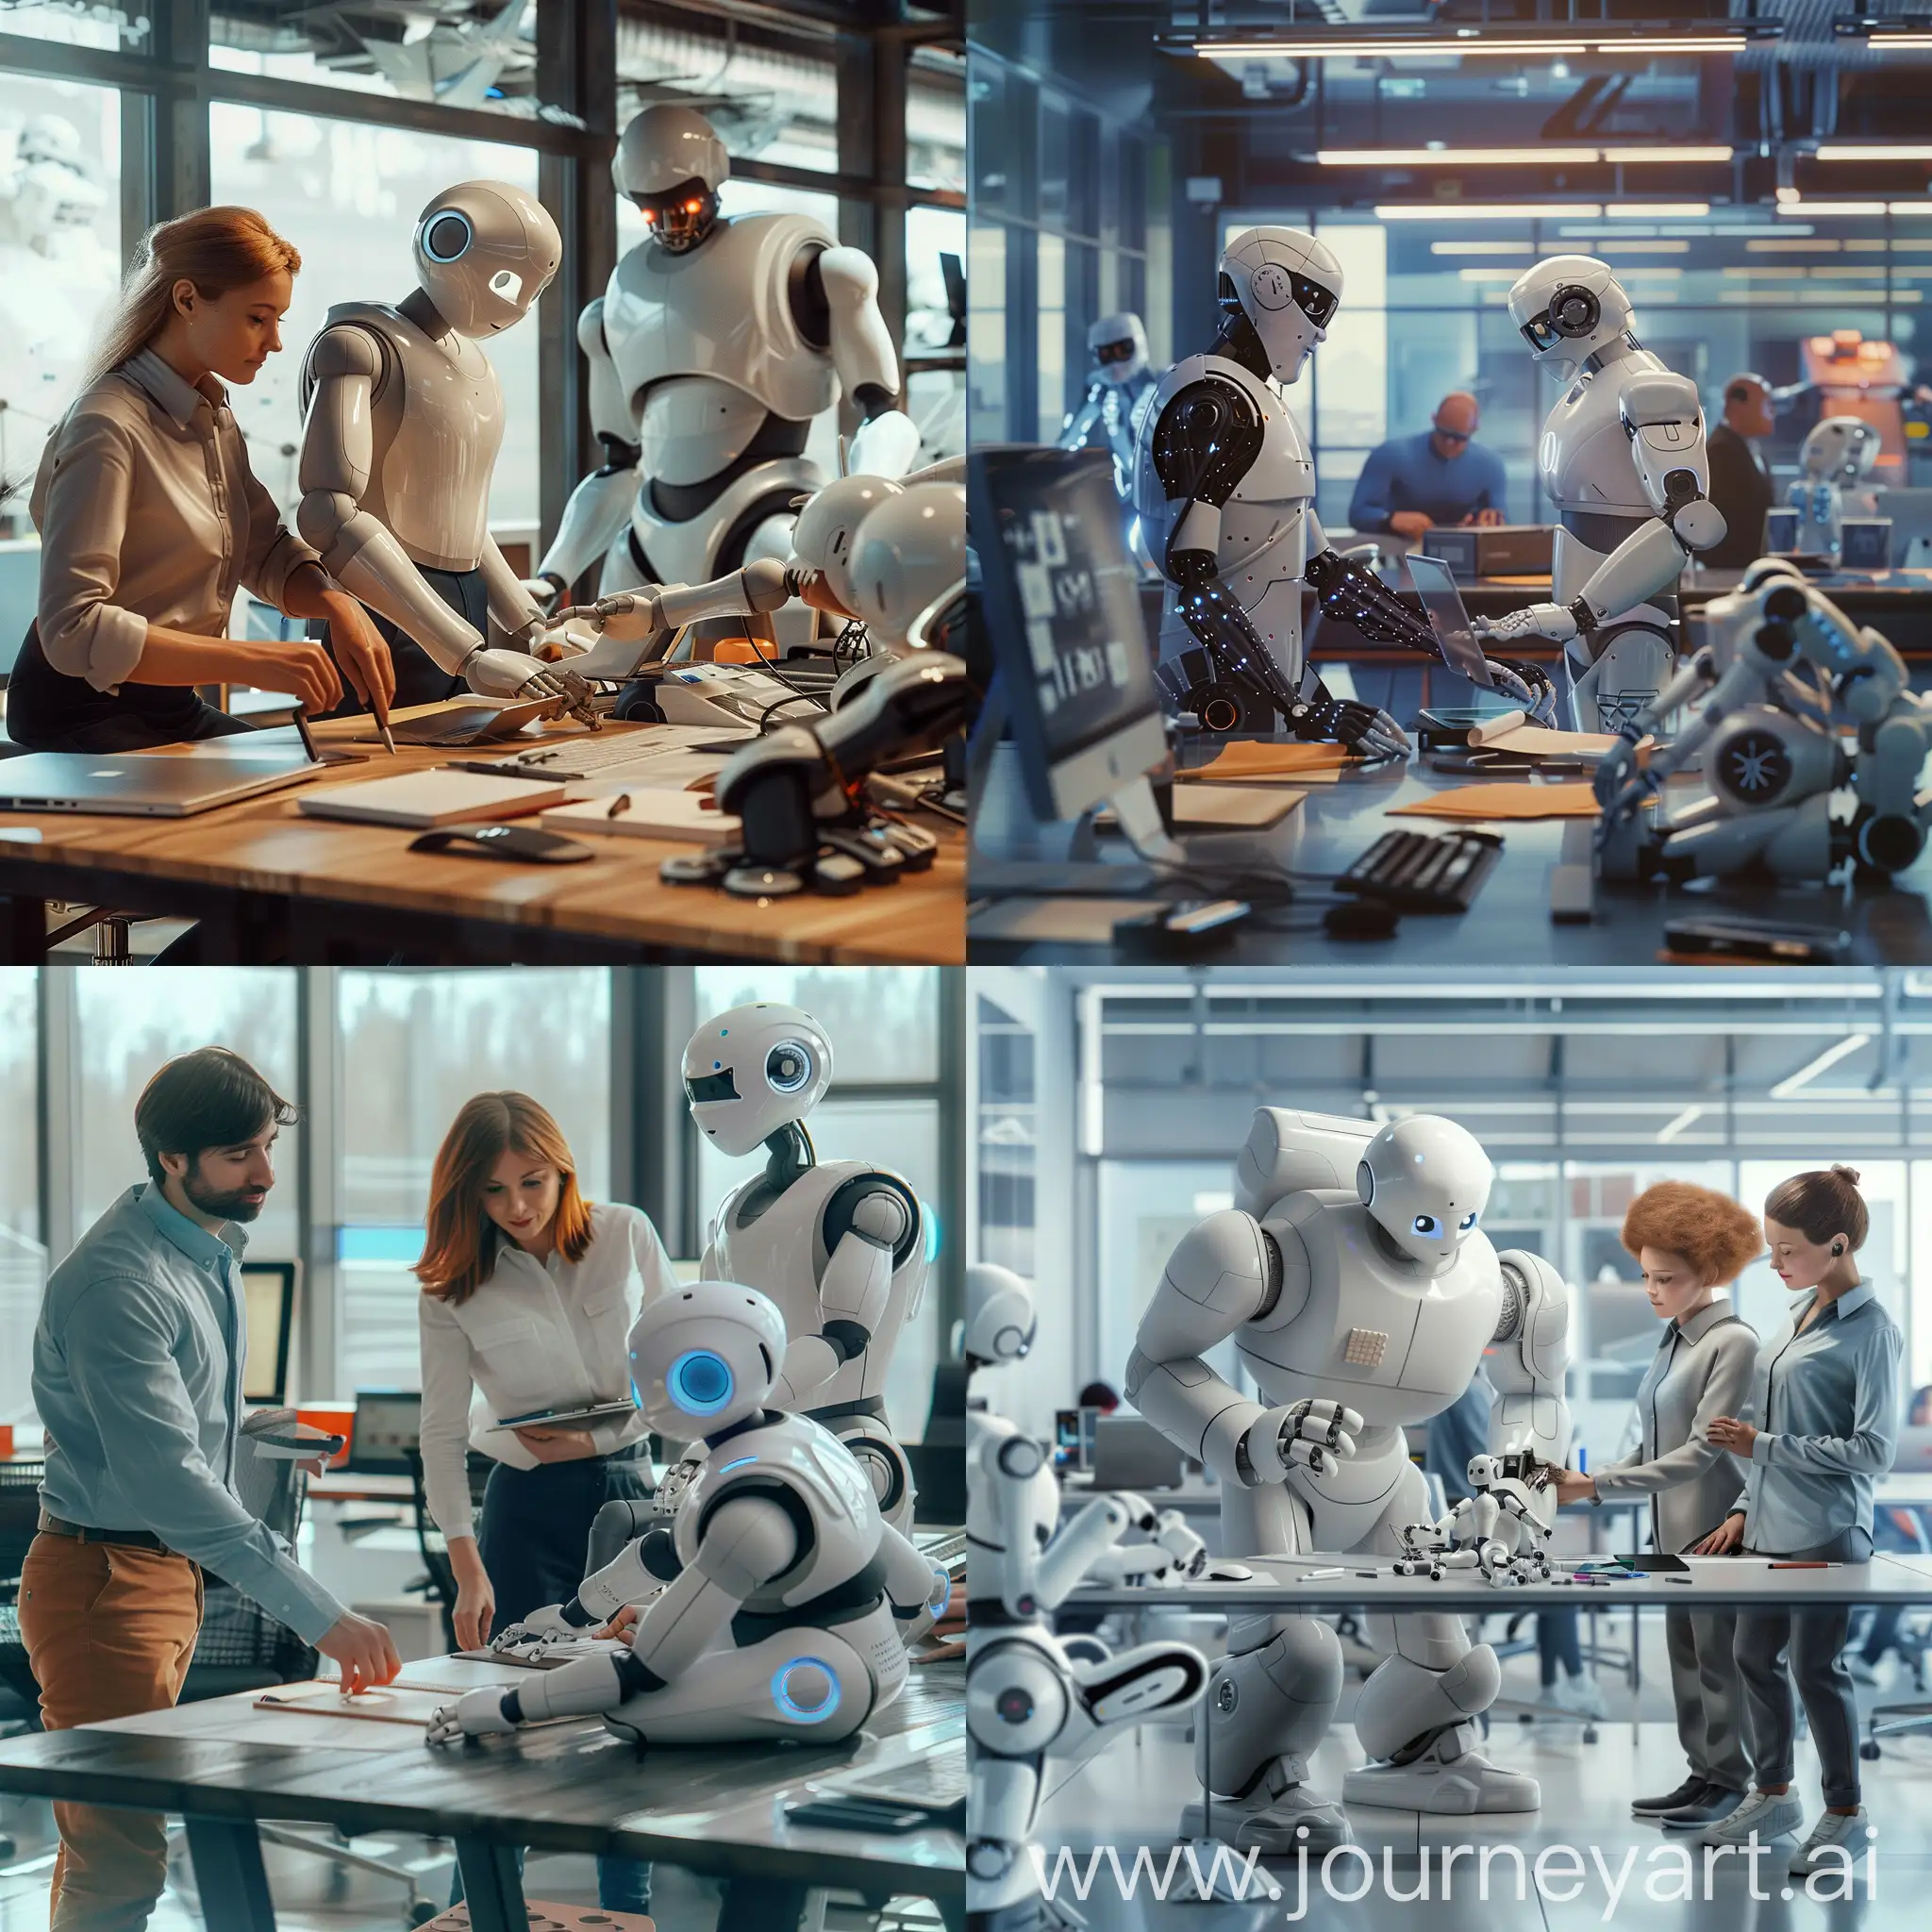 Create a photo-realistic image of a small team of technology founders working alongside robots in a futuristic, high tech office.